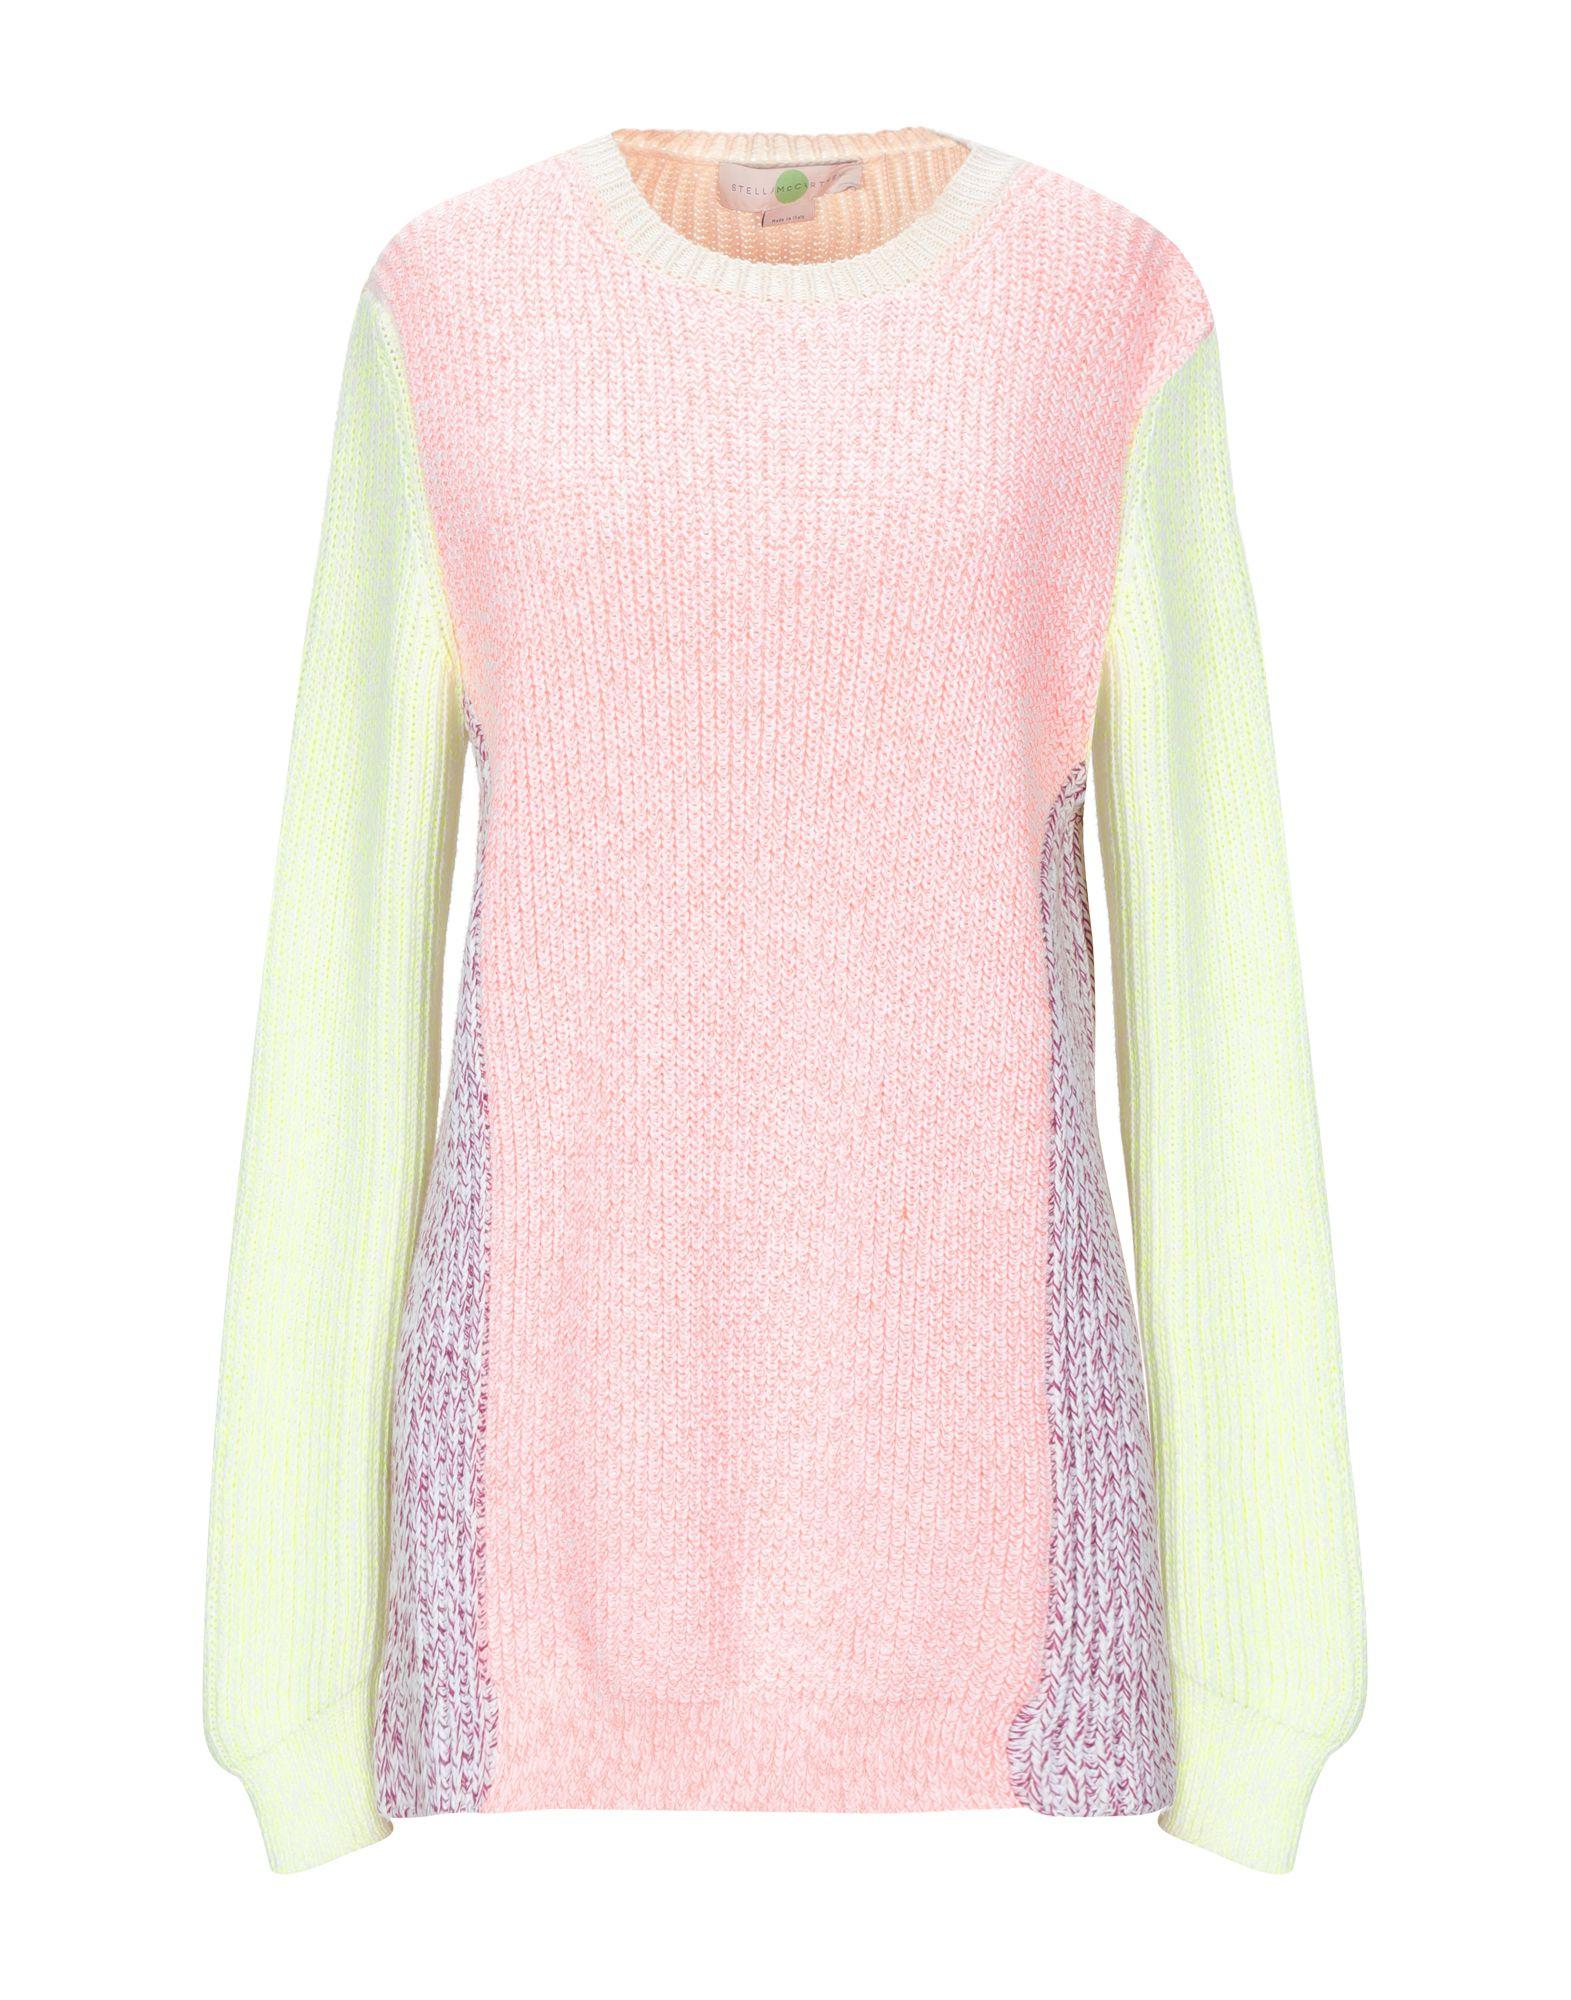 Stella McCartney Cotton Sweater in Coral (Pink) - Lyst